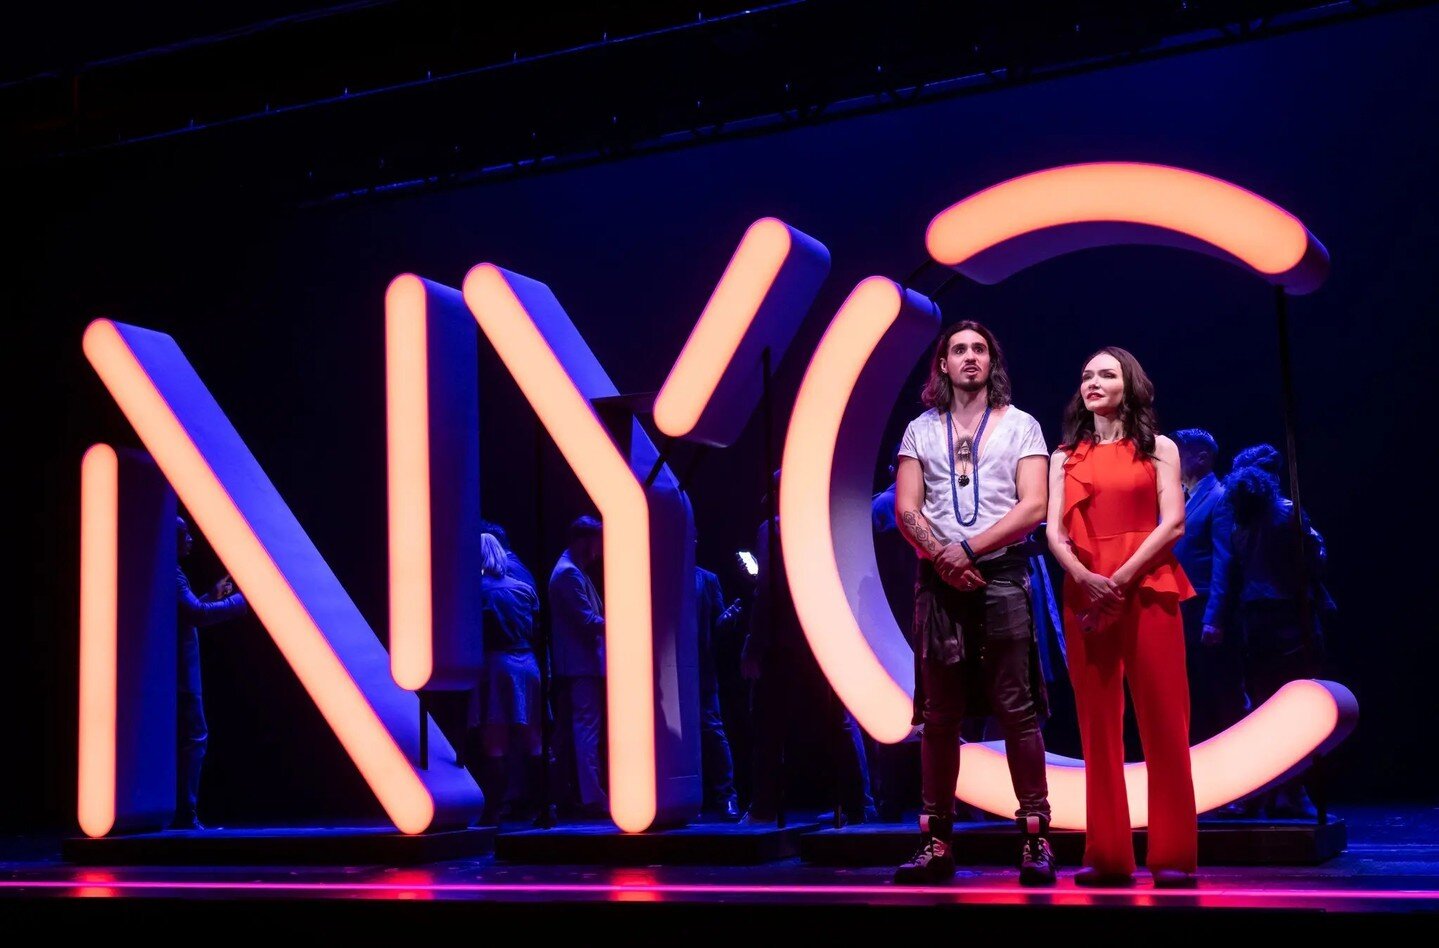 &ldquo;With love filling the days&rdquo; today and always 🗽⁠
This is it! If you&rsquo;re in NYC, don&rsquo;t miss out on the final weeks of @Companybway 🍸⁠
⁠
Final performance Sunday, July 31.⁠
⁠
#CompaNY⁠
📸: Sara Krulwich/The New York Times⁠